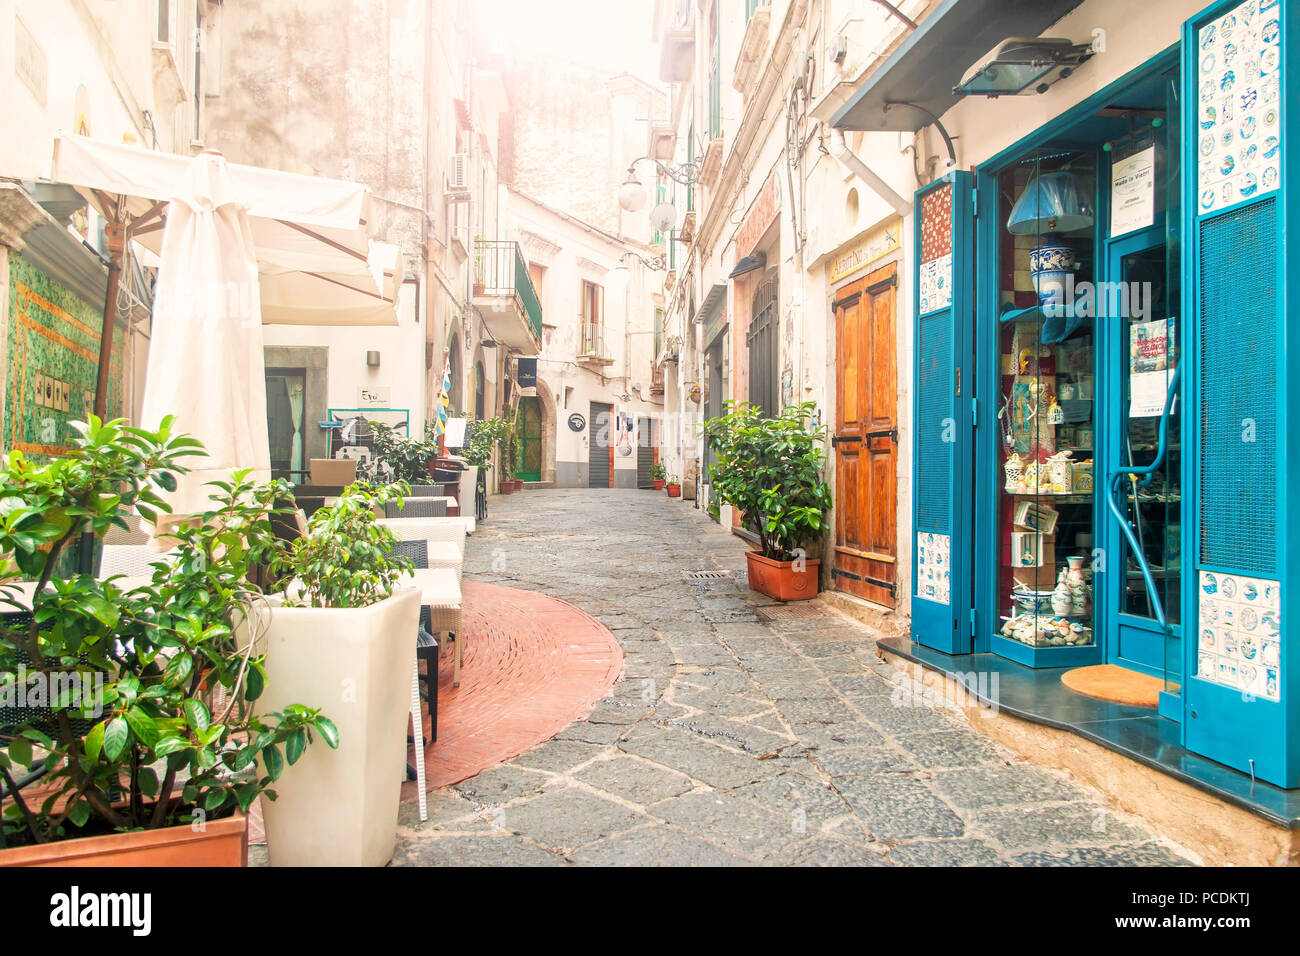 VIETRI-SUL-MARE, ITALY - 3 SEPTEMBER, 2017: view of empty narrow street full of cafes and souvenir shops in early morning with sun shining through the Stock Photo